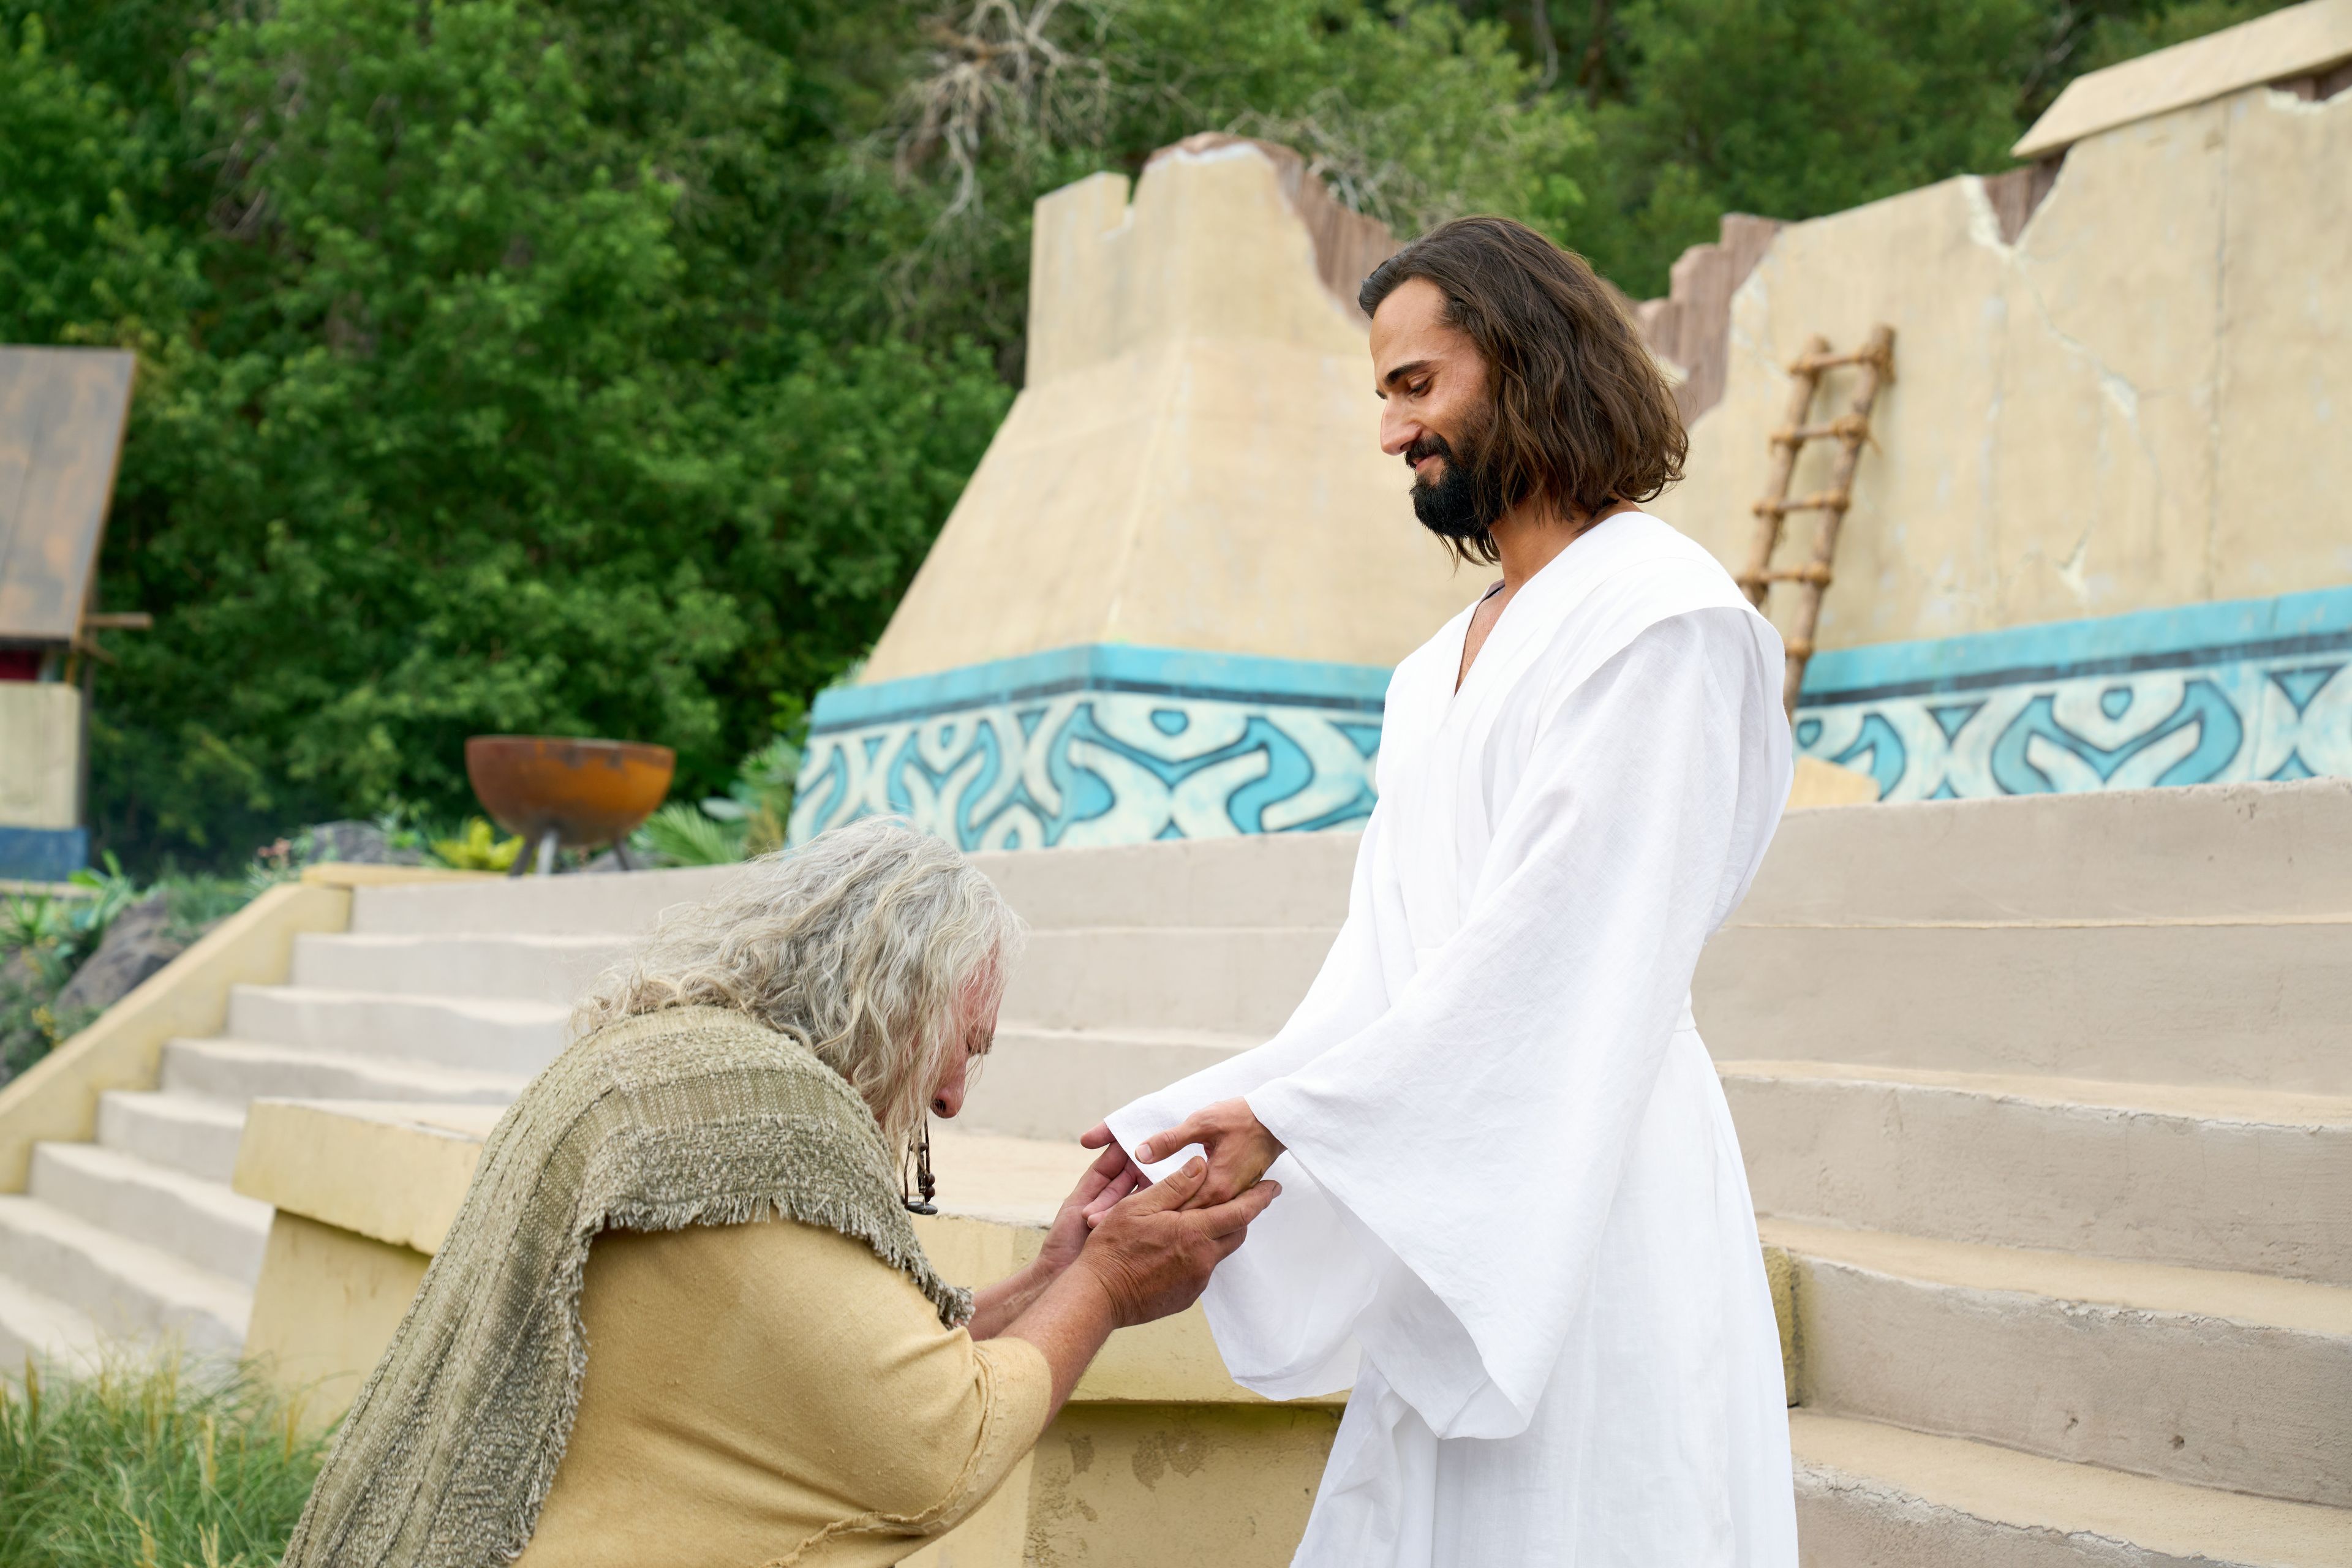 The resurrected Savior, Jesus Christ, appears to the ancient inhabitants of the Americas. Jesus holds out his hands and allows Nephi to touch them.